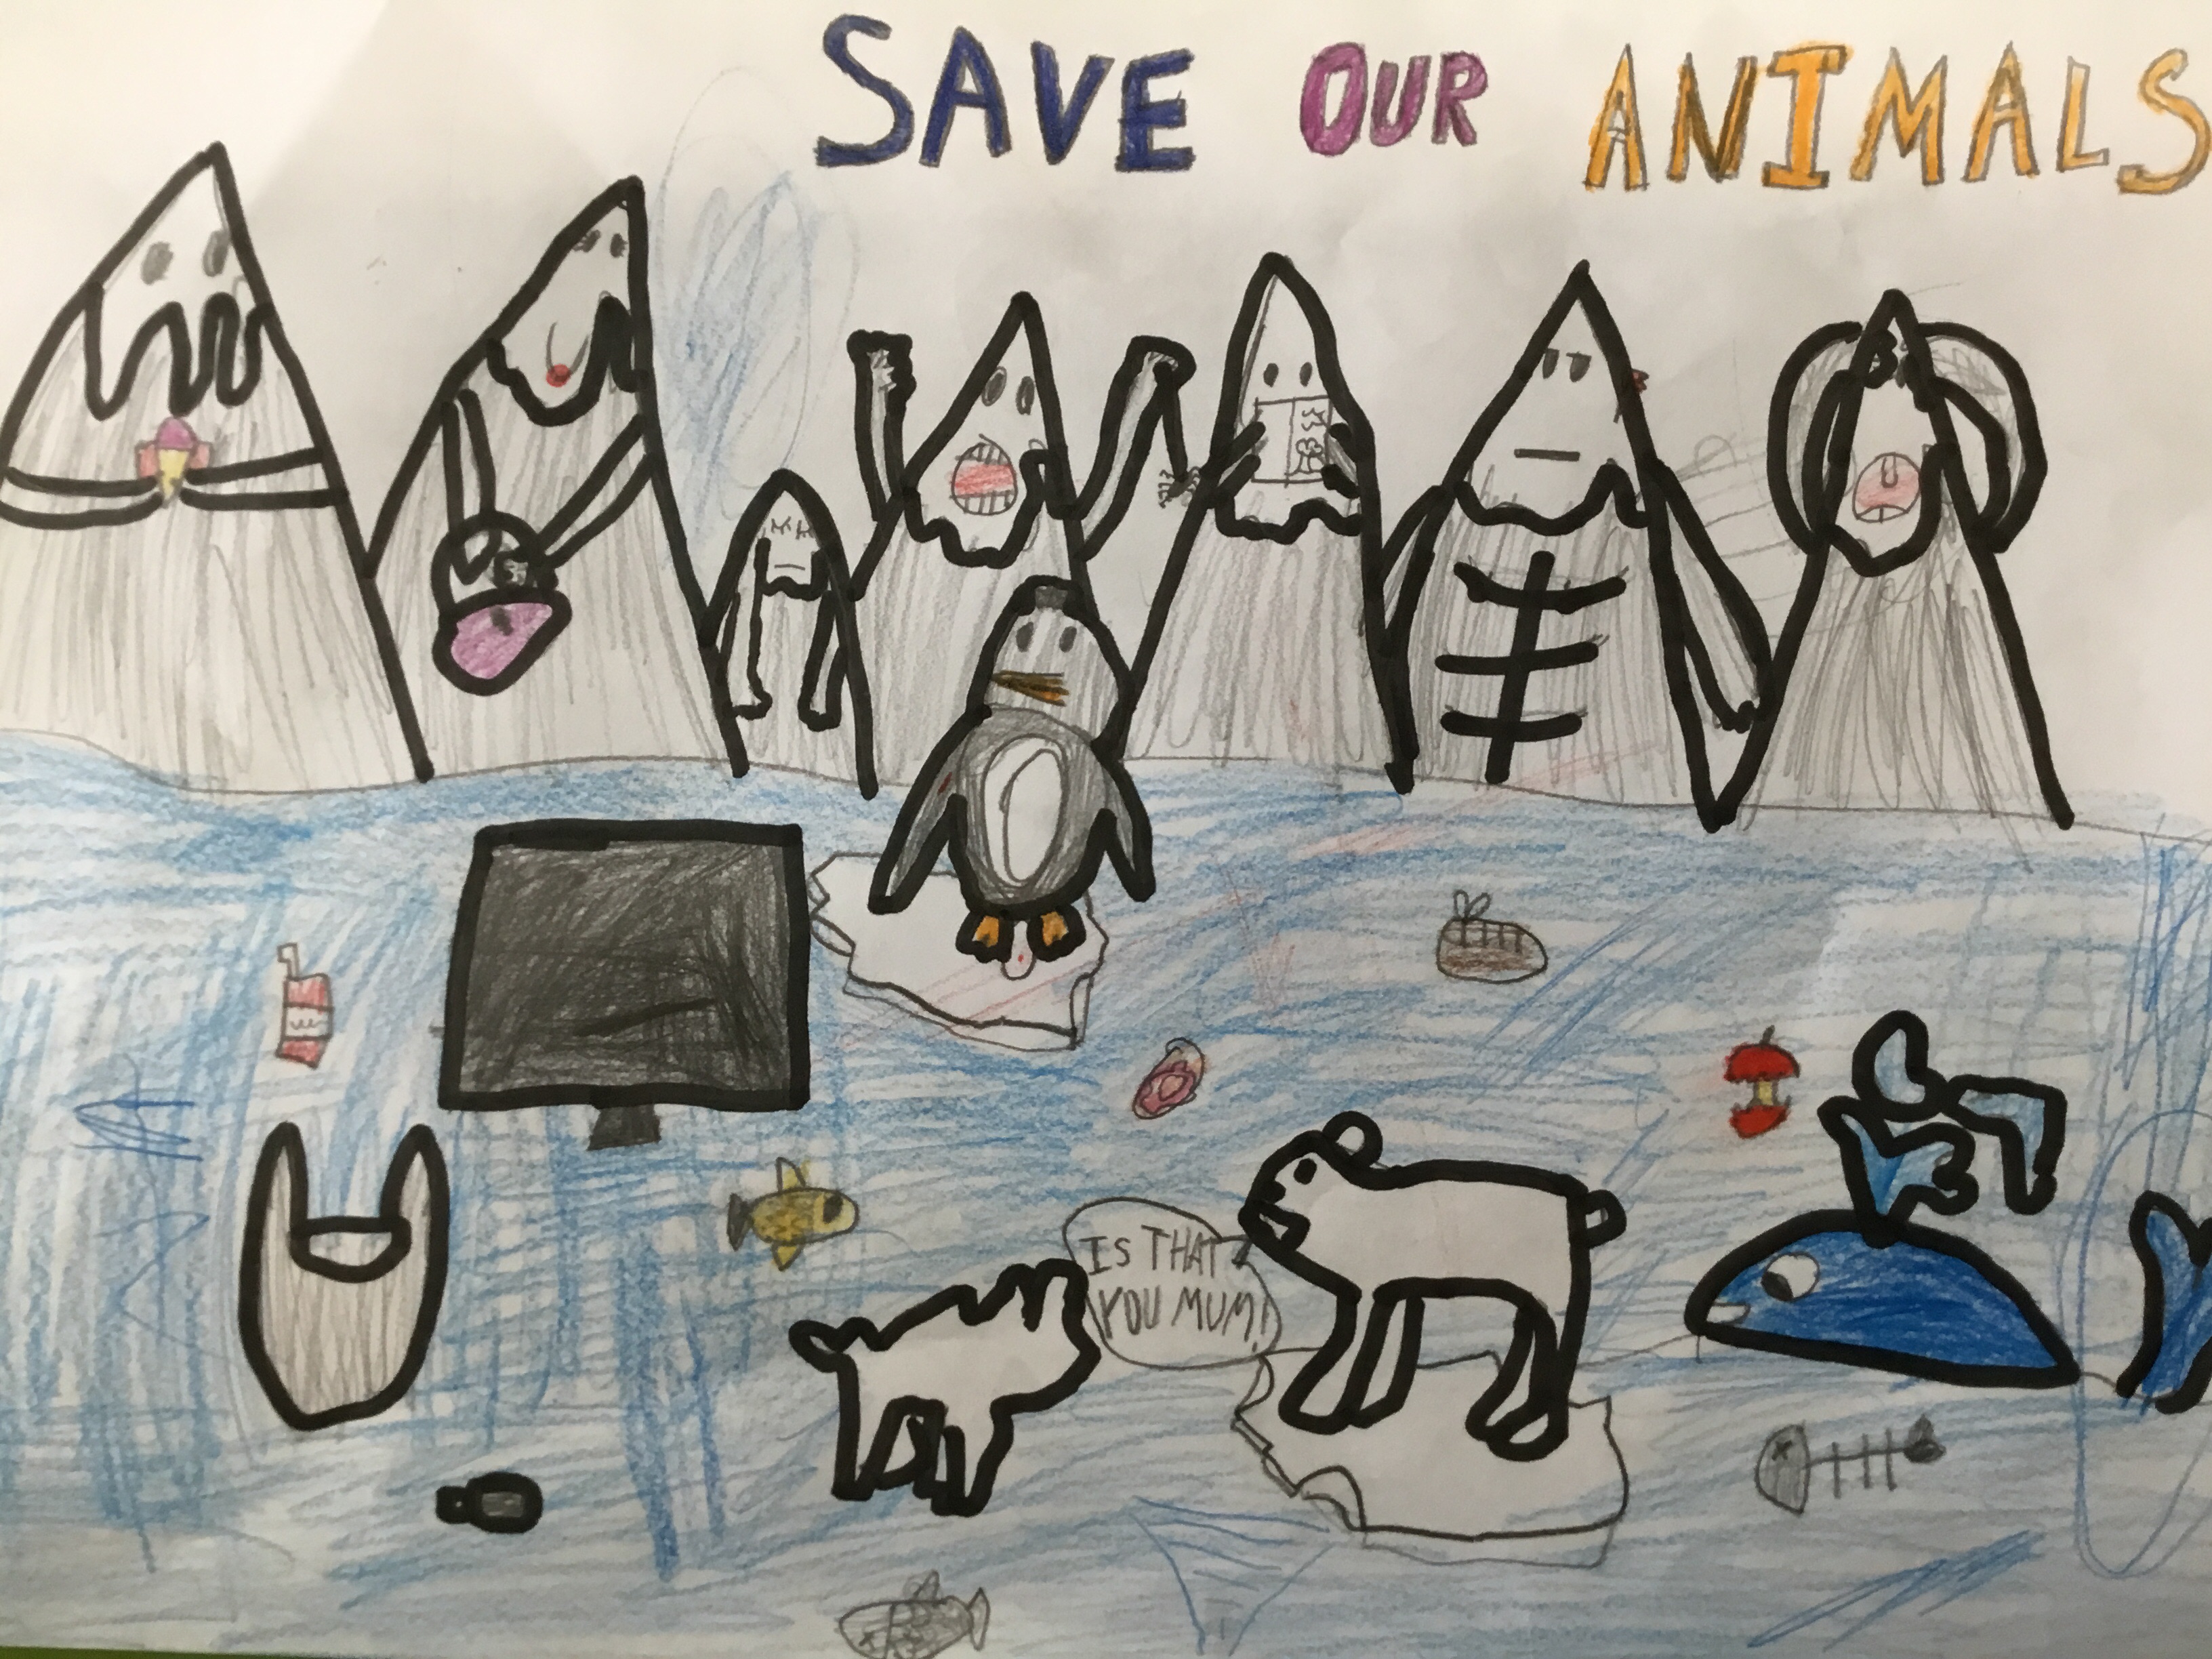 Save Our Animals - Kids Care About Climate Change 2021